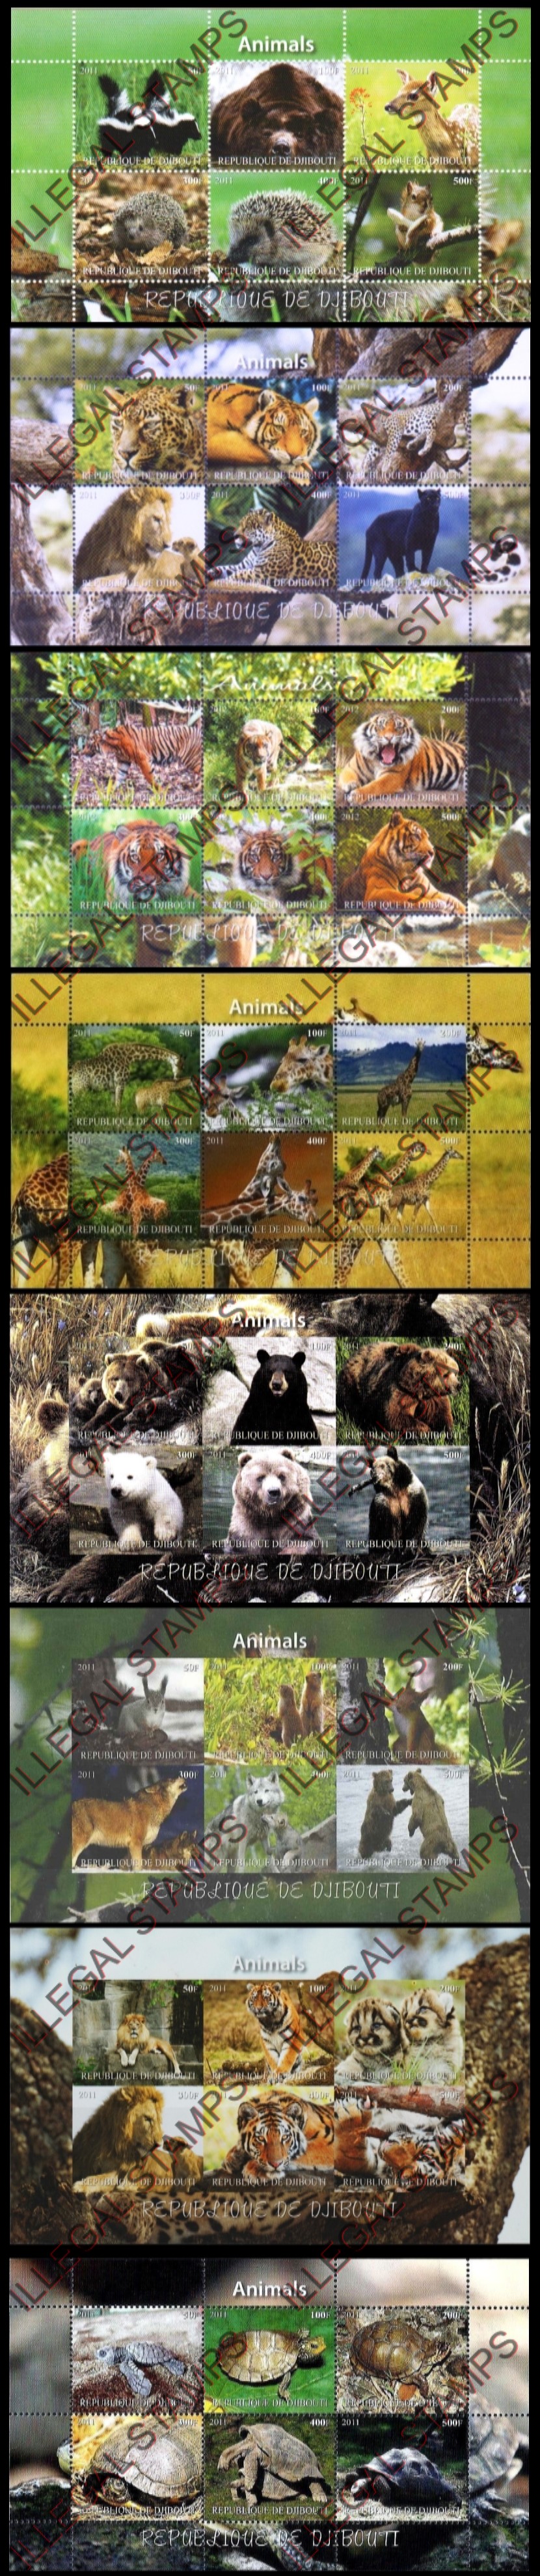 Djibouti 2011 Animals Horizontal Illegal Stamp Sheetlets of 6 with Picture Backgrounds